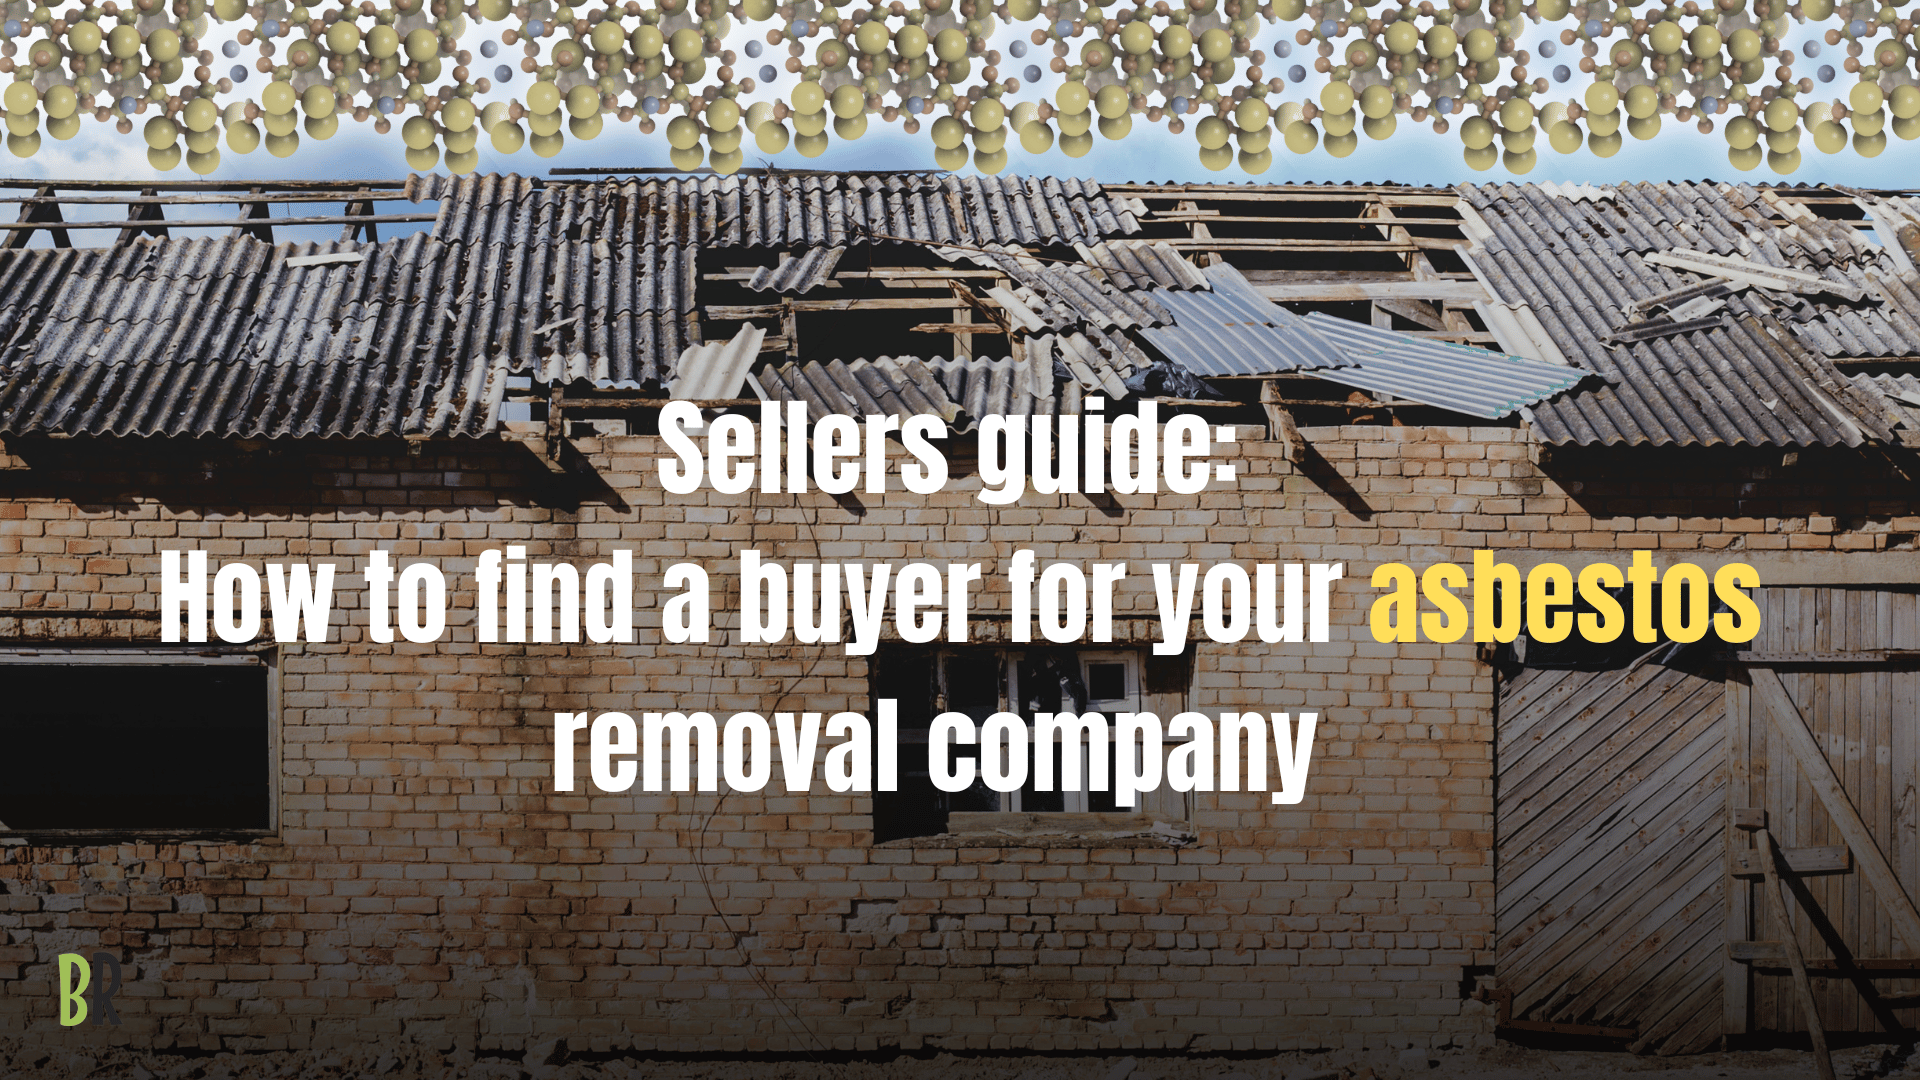 How to sell an asbestos business quickly 